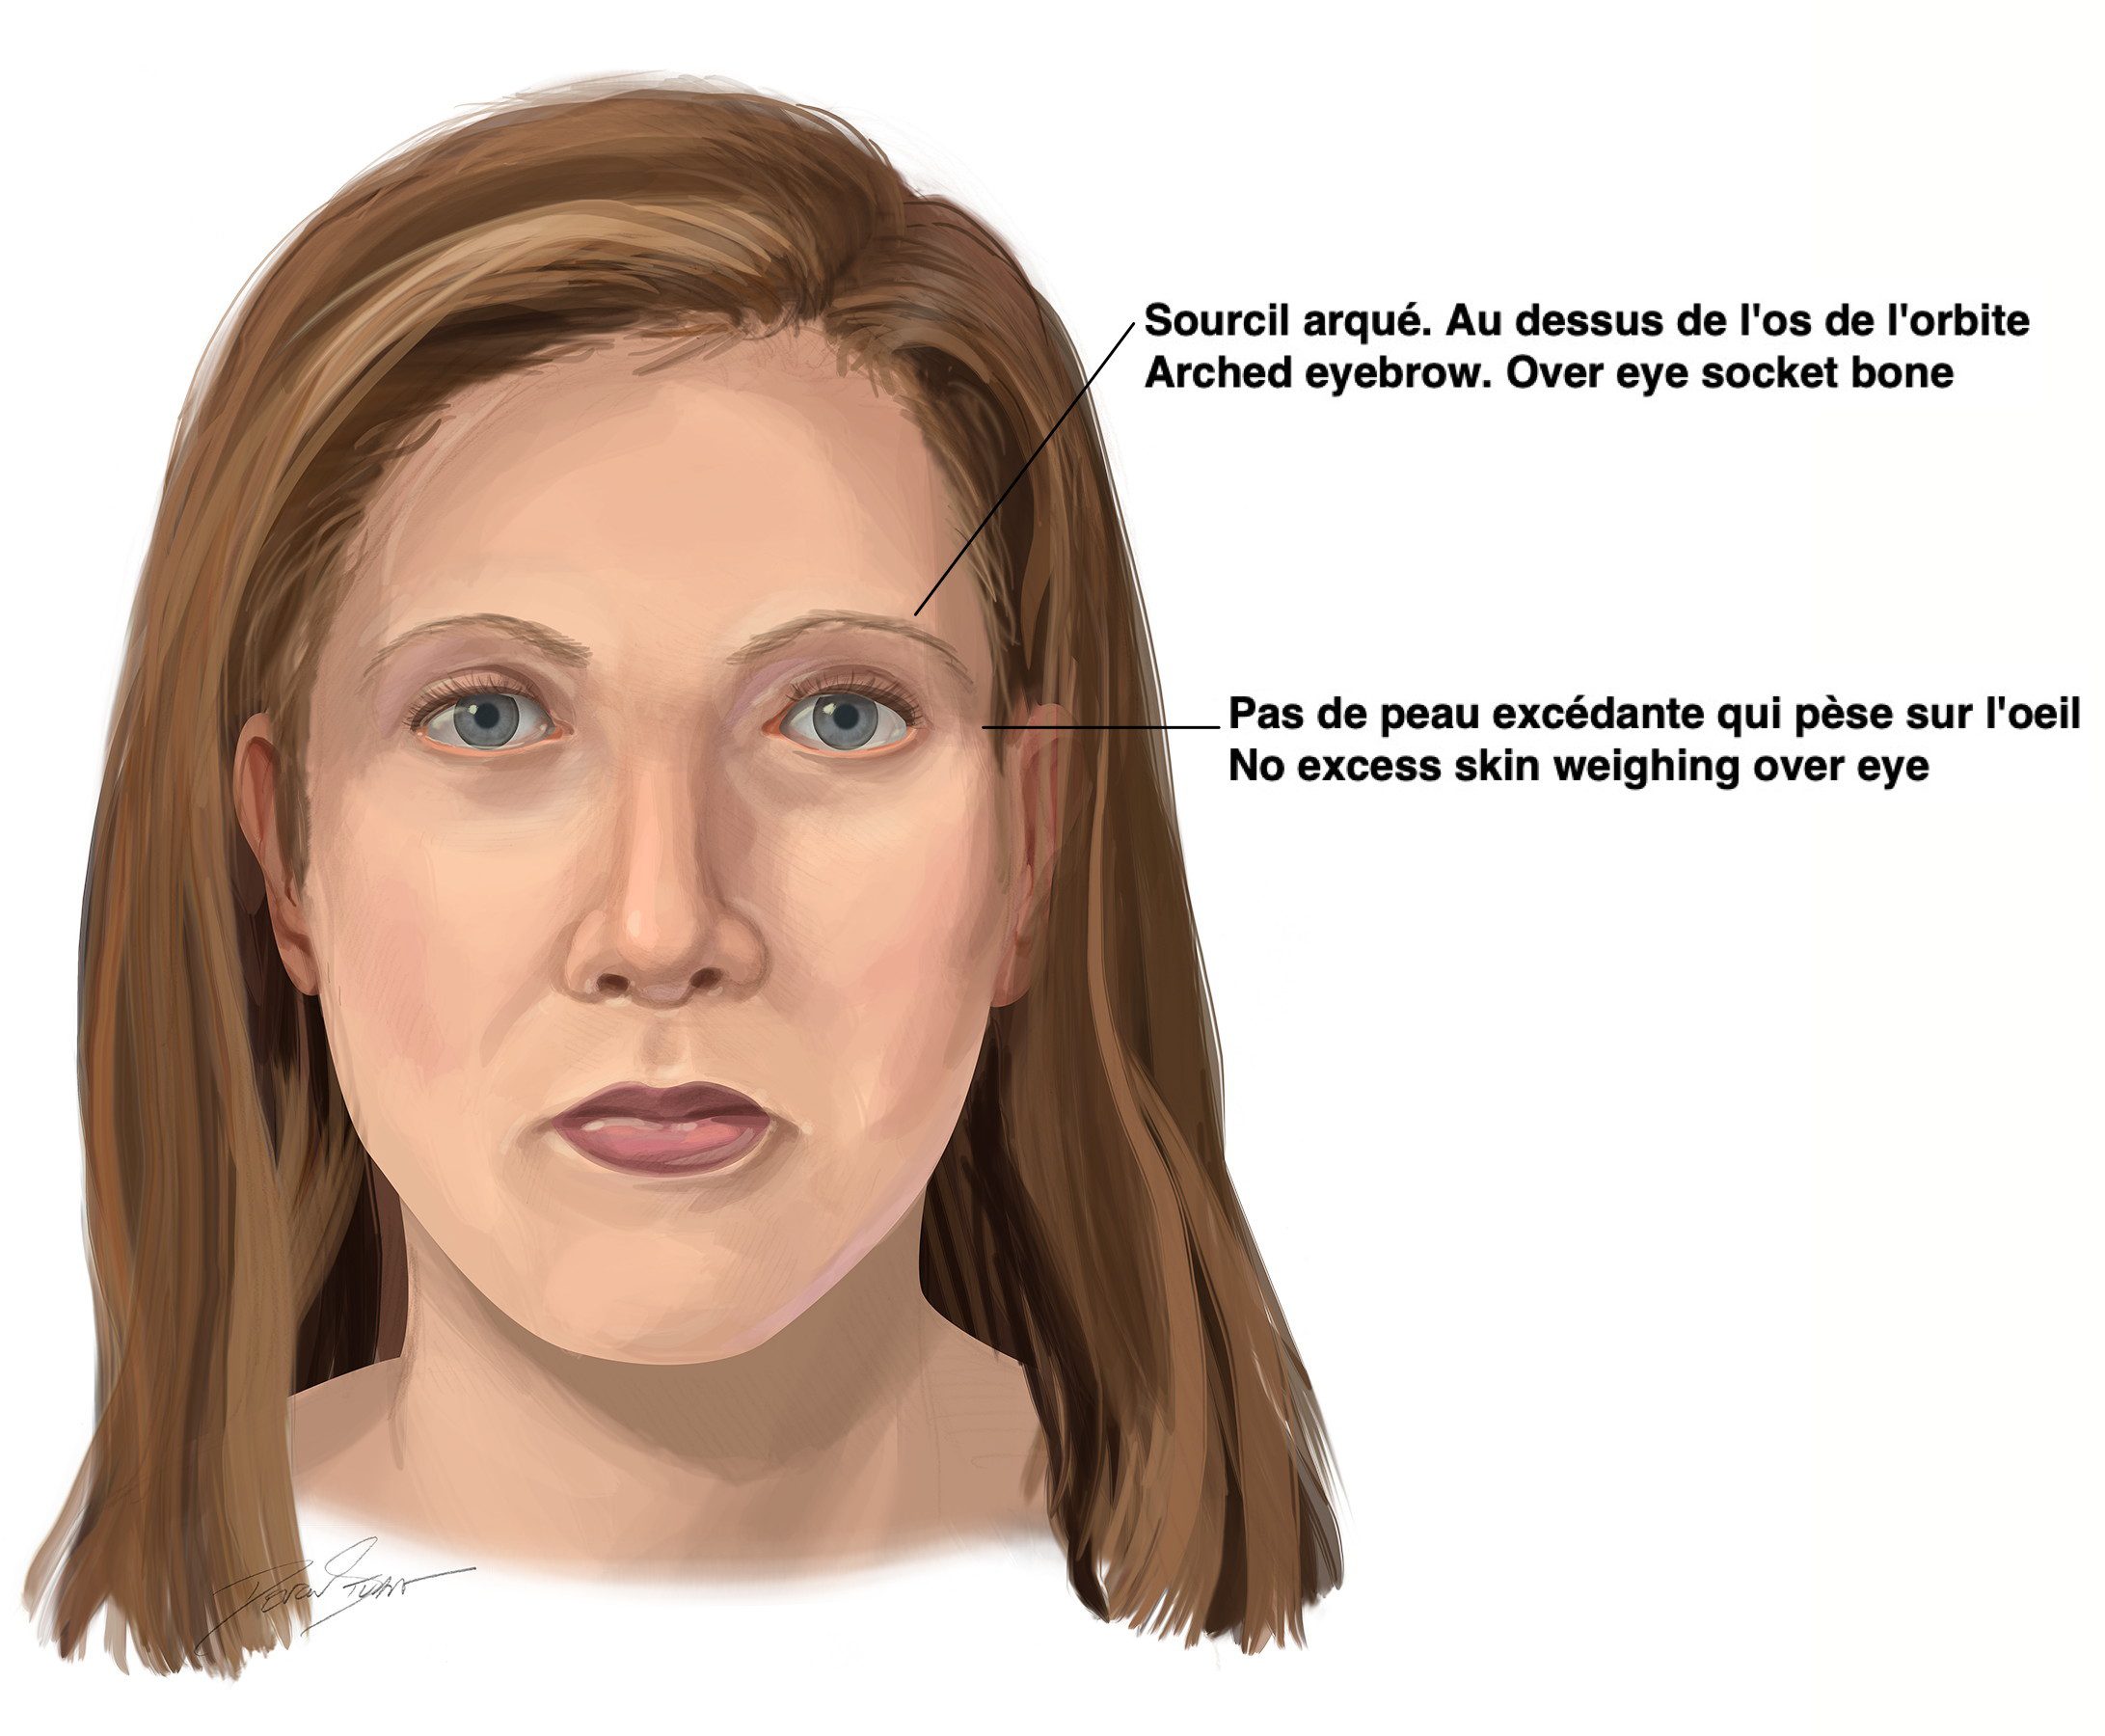 Figure 1 (a): Schematic of young woman with ideal brow showing arch and position over the eye socket